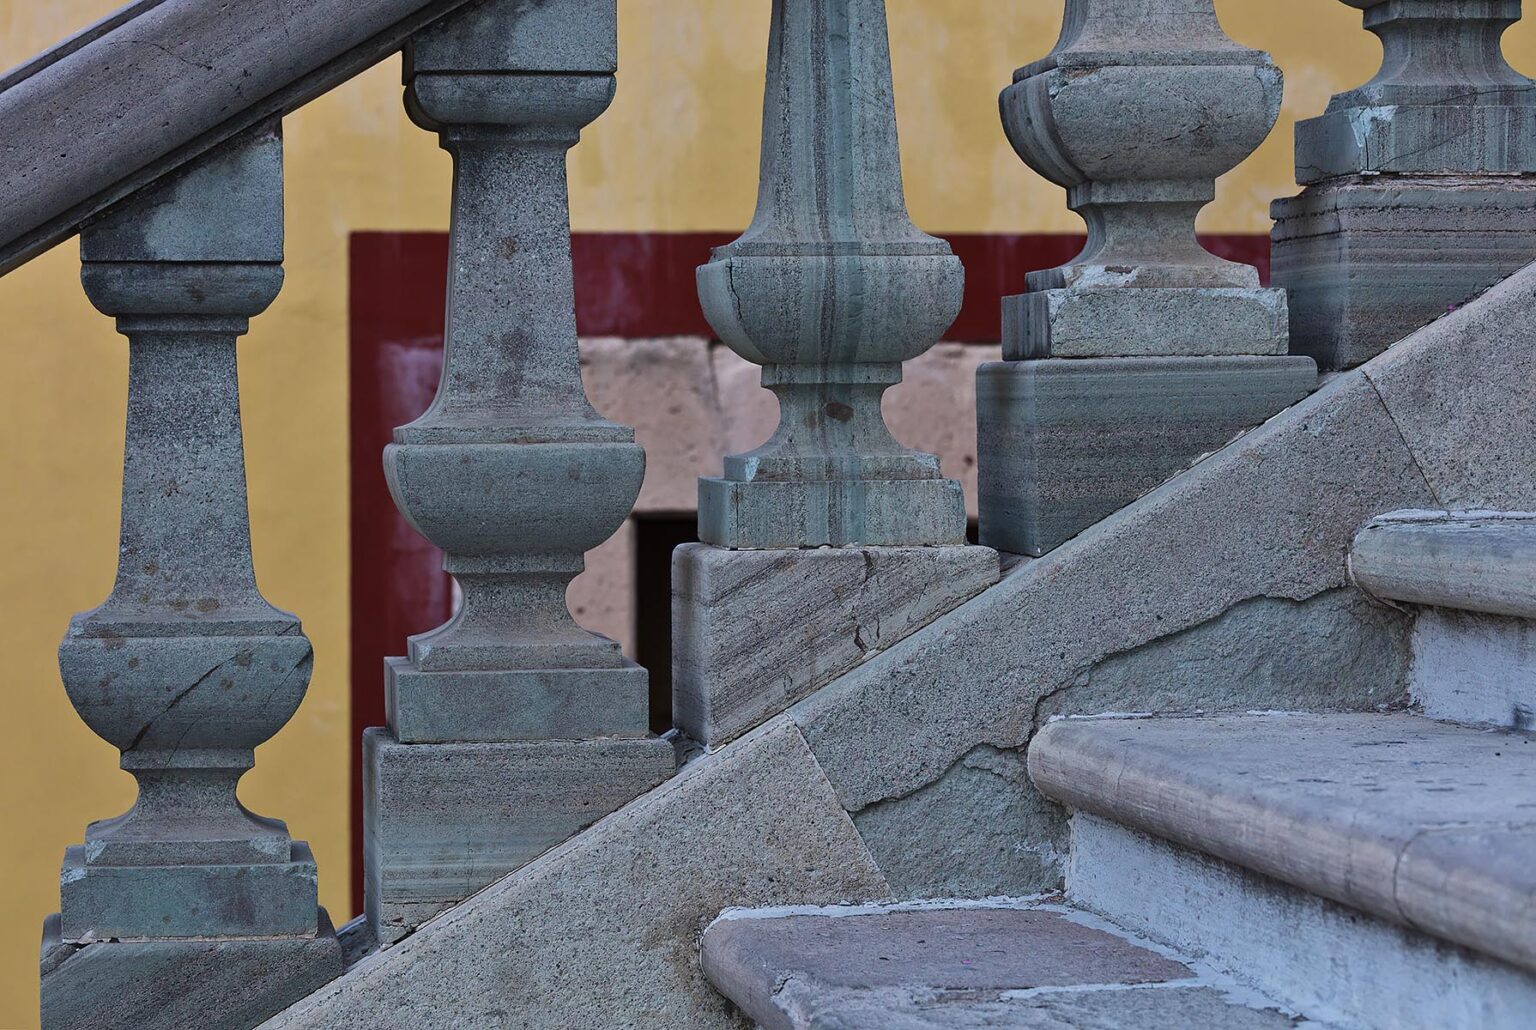 Architectural detail on the front steps of the UNIVERSITY OF GUANAJUATO - GUANAJUATO, MEXICO